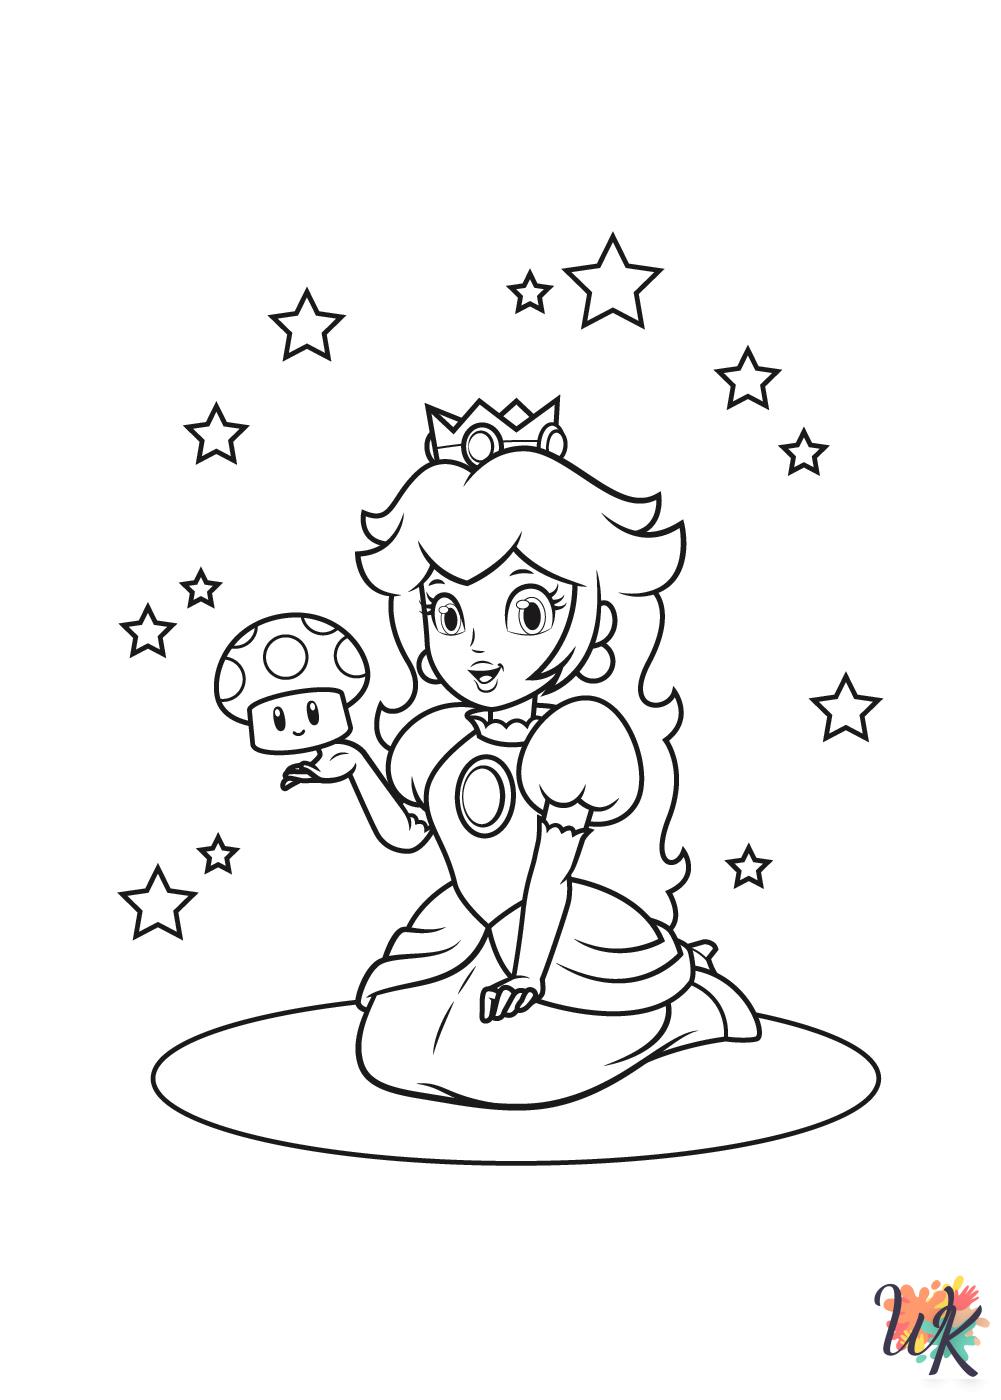 free printable Princess Peach coloring pages for adults